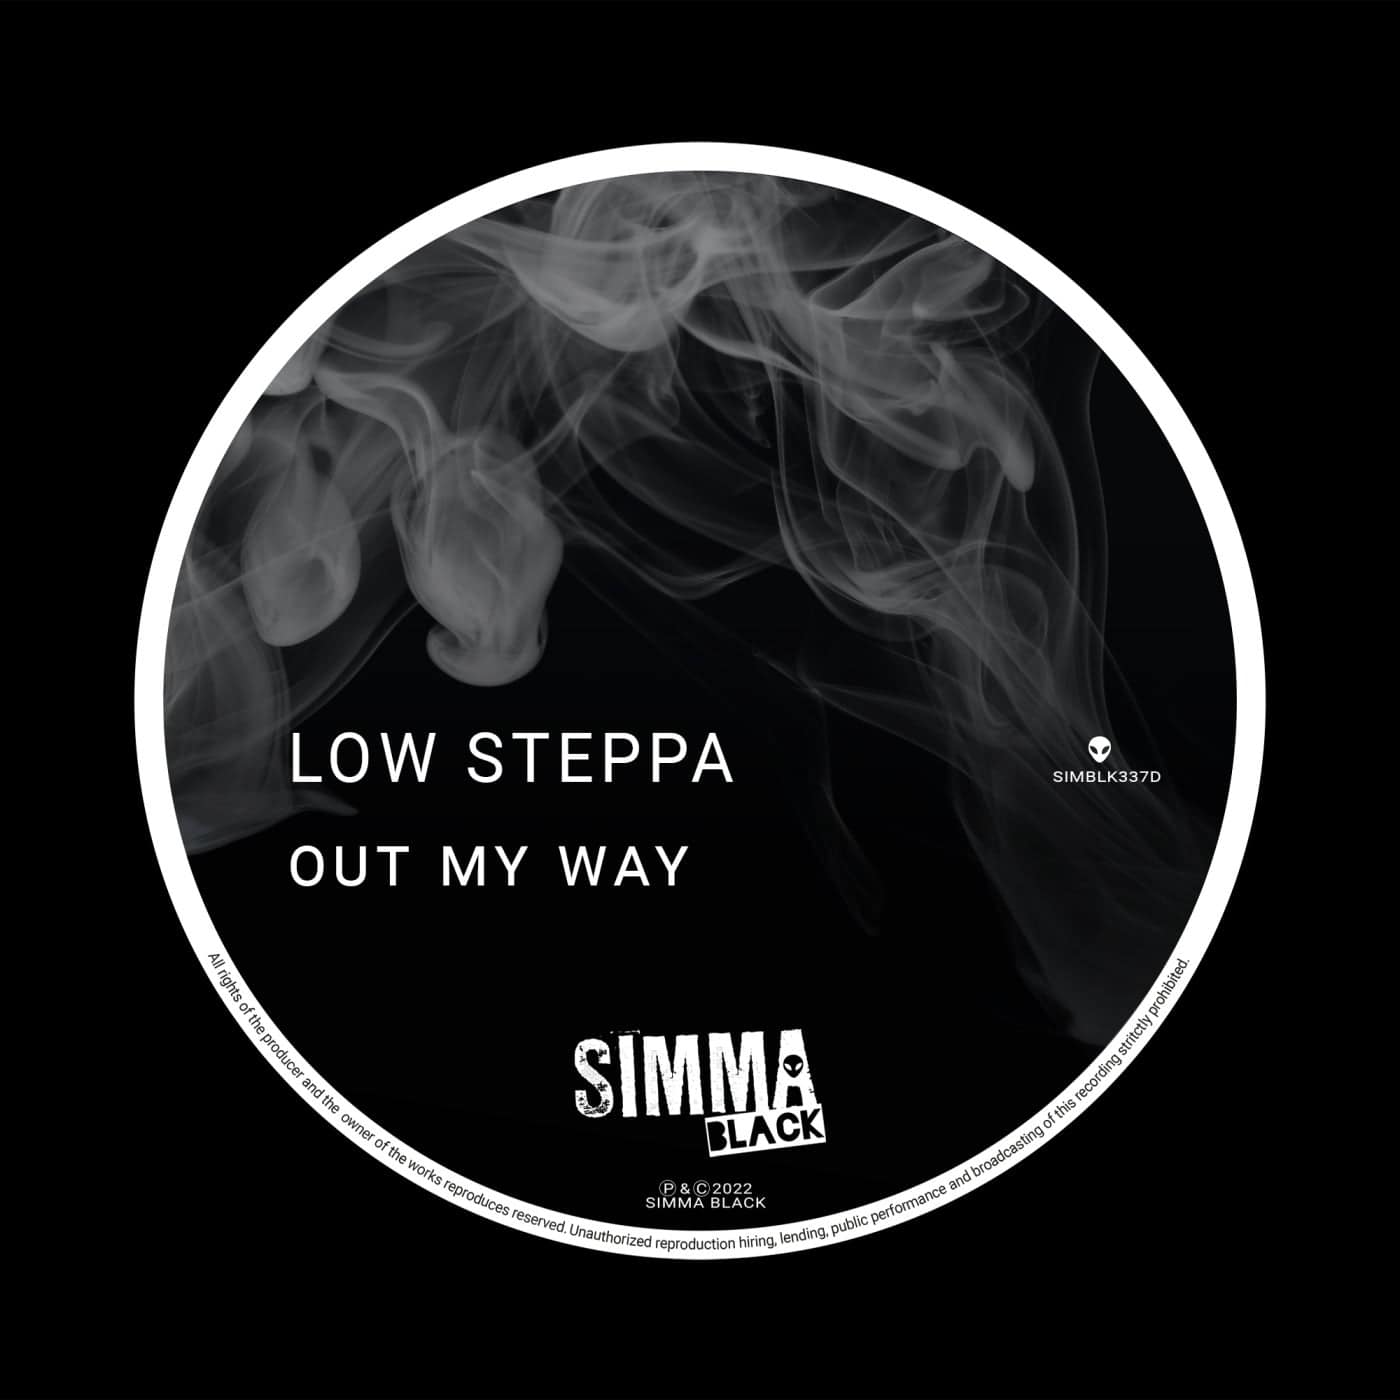 image cover: Low Steppa - Out My Way / SIMBLK337D